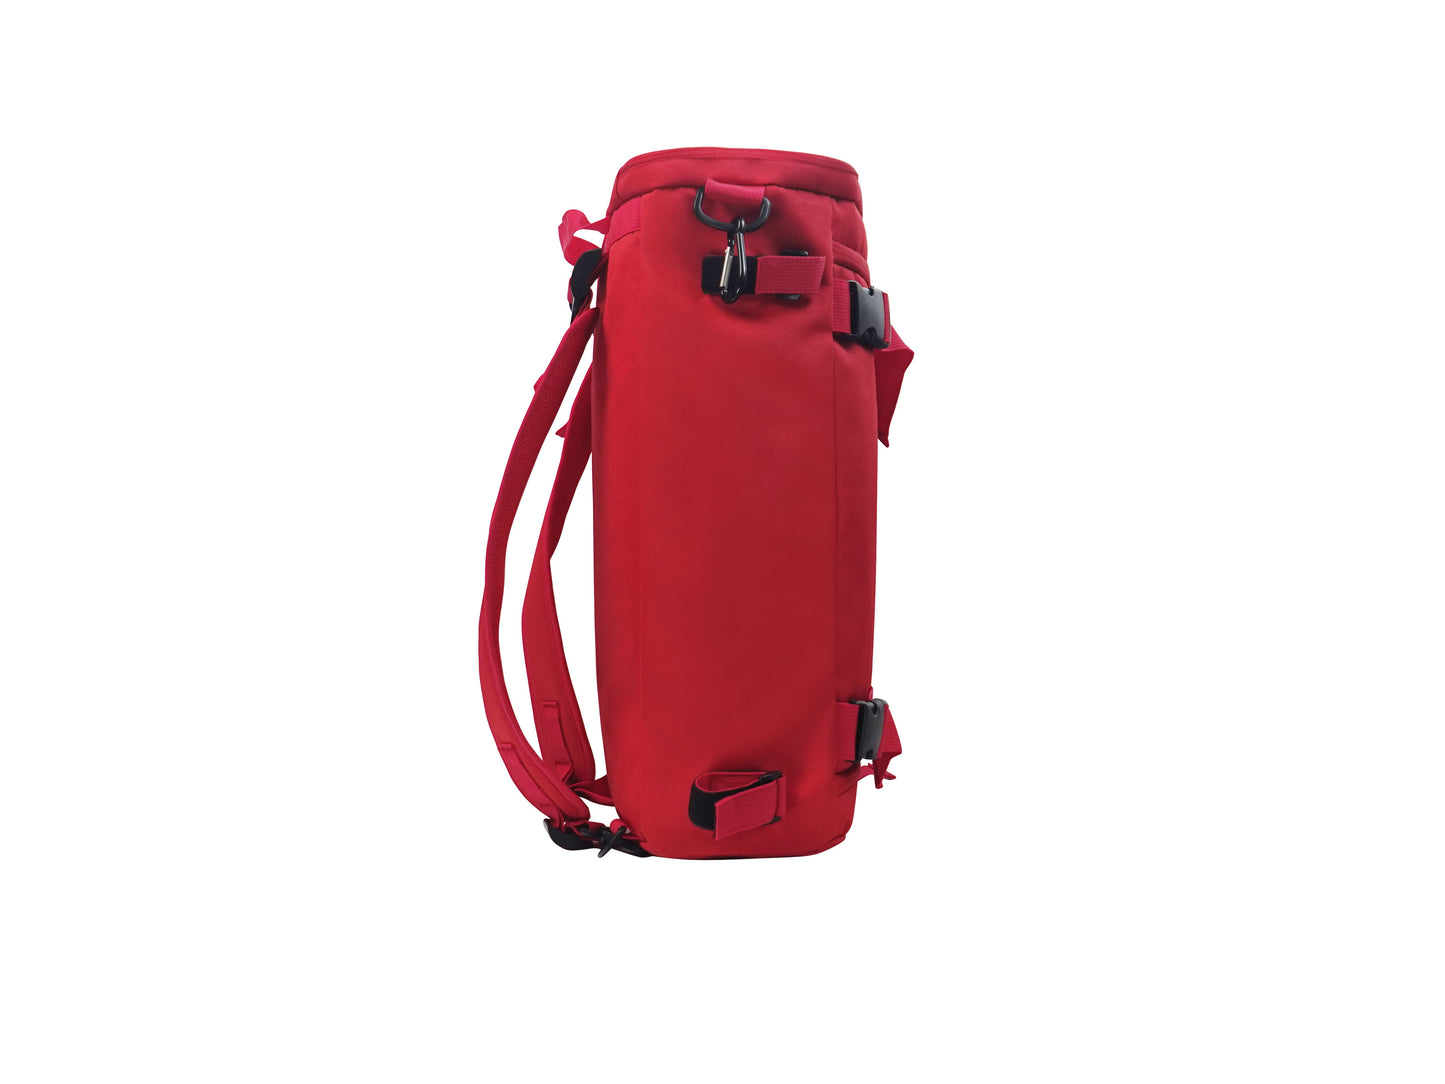 Hertford HC - Accra Backpack - Red